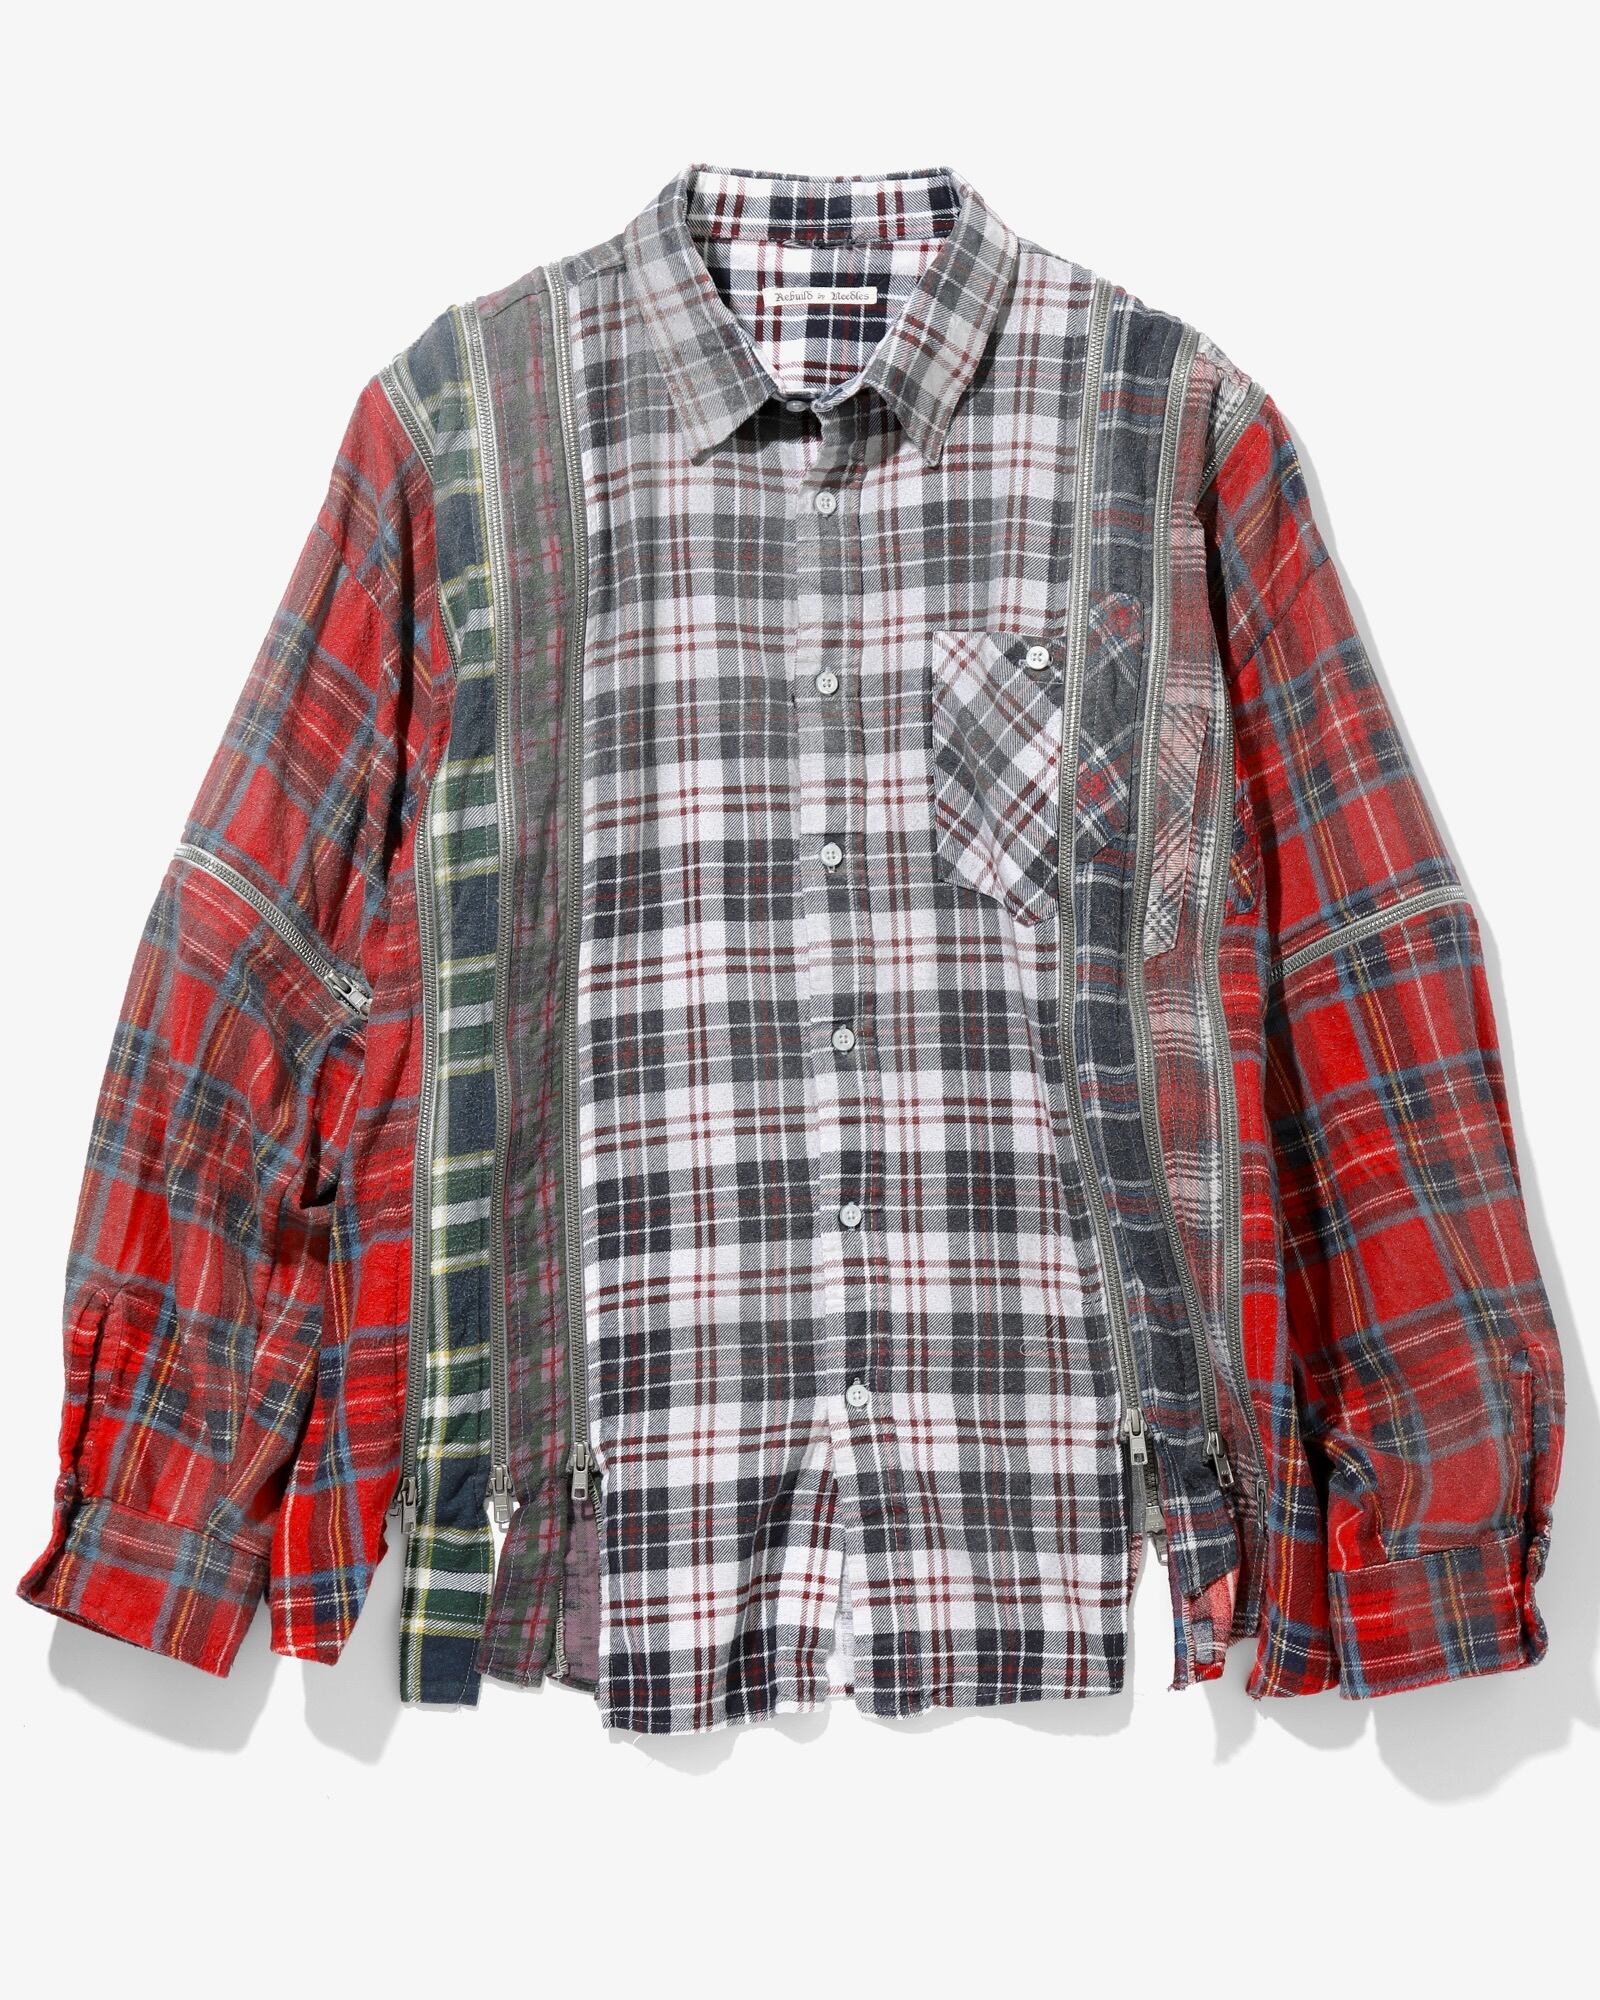 【Rebuild by NEEDLES】Flannel Shirt -> 7 Cuts Zipped Wide Shirt / Reflection  | idealclasse powered by BASE